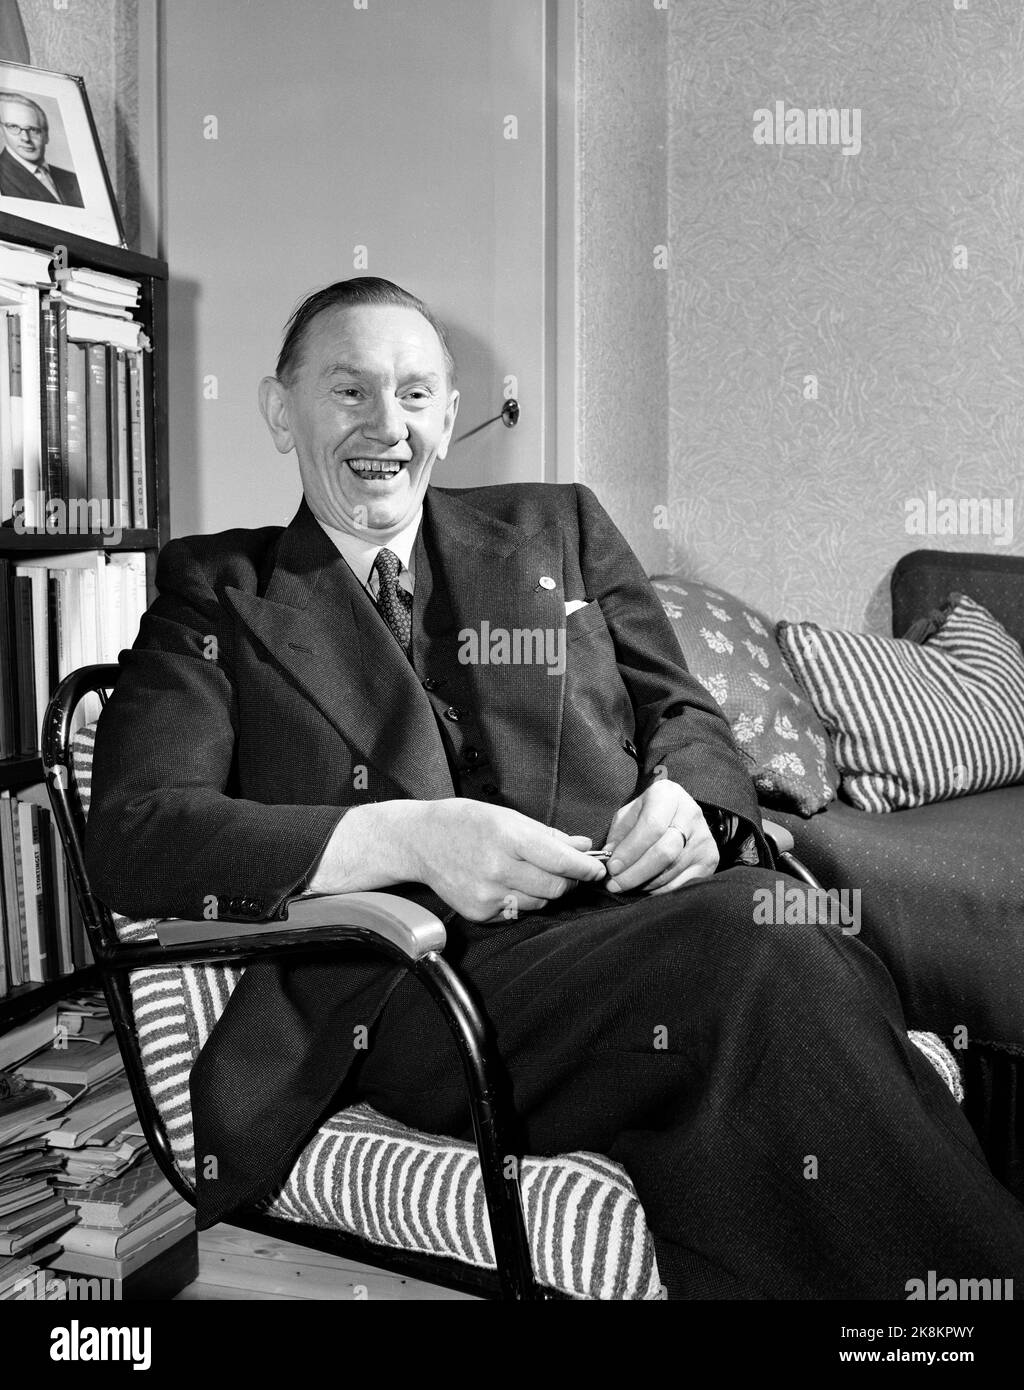 Oslo November 1951 at the home of the newly appointed Prime Minister Oscar Torp (1893-1958). Torp was prime minister from 19/11-1951 to 22/1-1955. Smiling Interview situation. Photo: Sverre A. Børretzen / Current / NTB Stock Photo